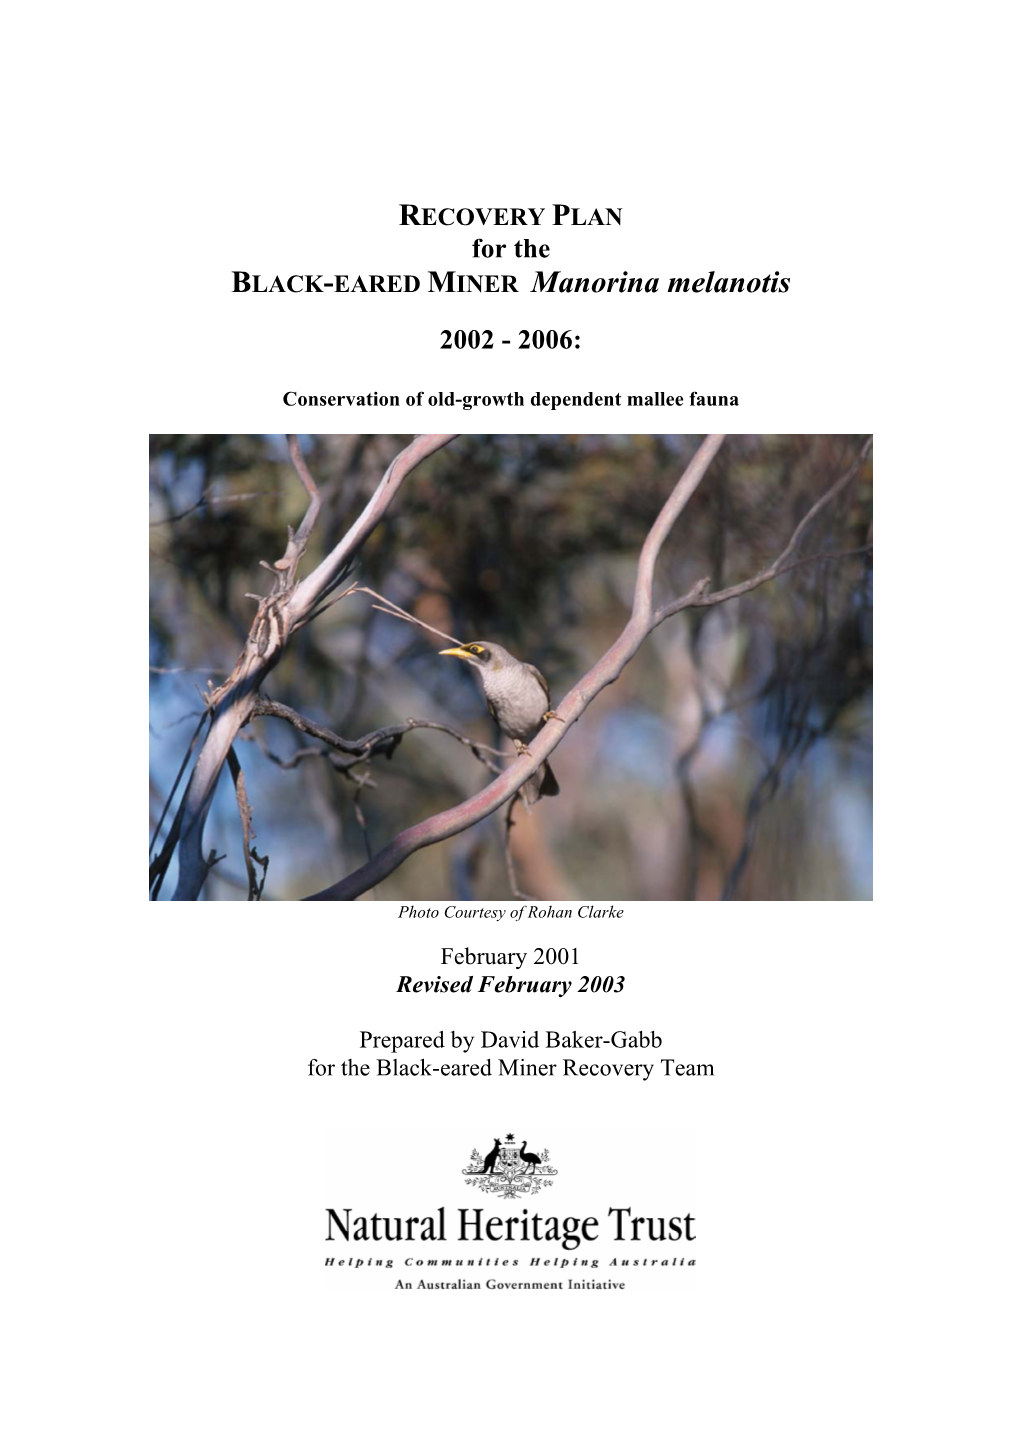 Recovery Plan for the Black-Eared Miner Manorina Melanotis 2002 - 2006: Conservation of Old-Growth Dependent Mallee Fauna